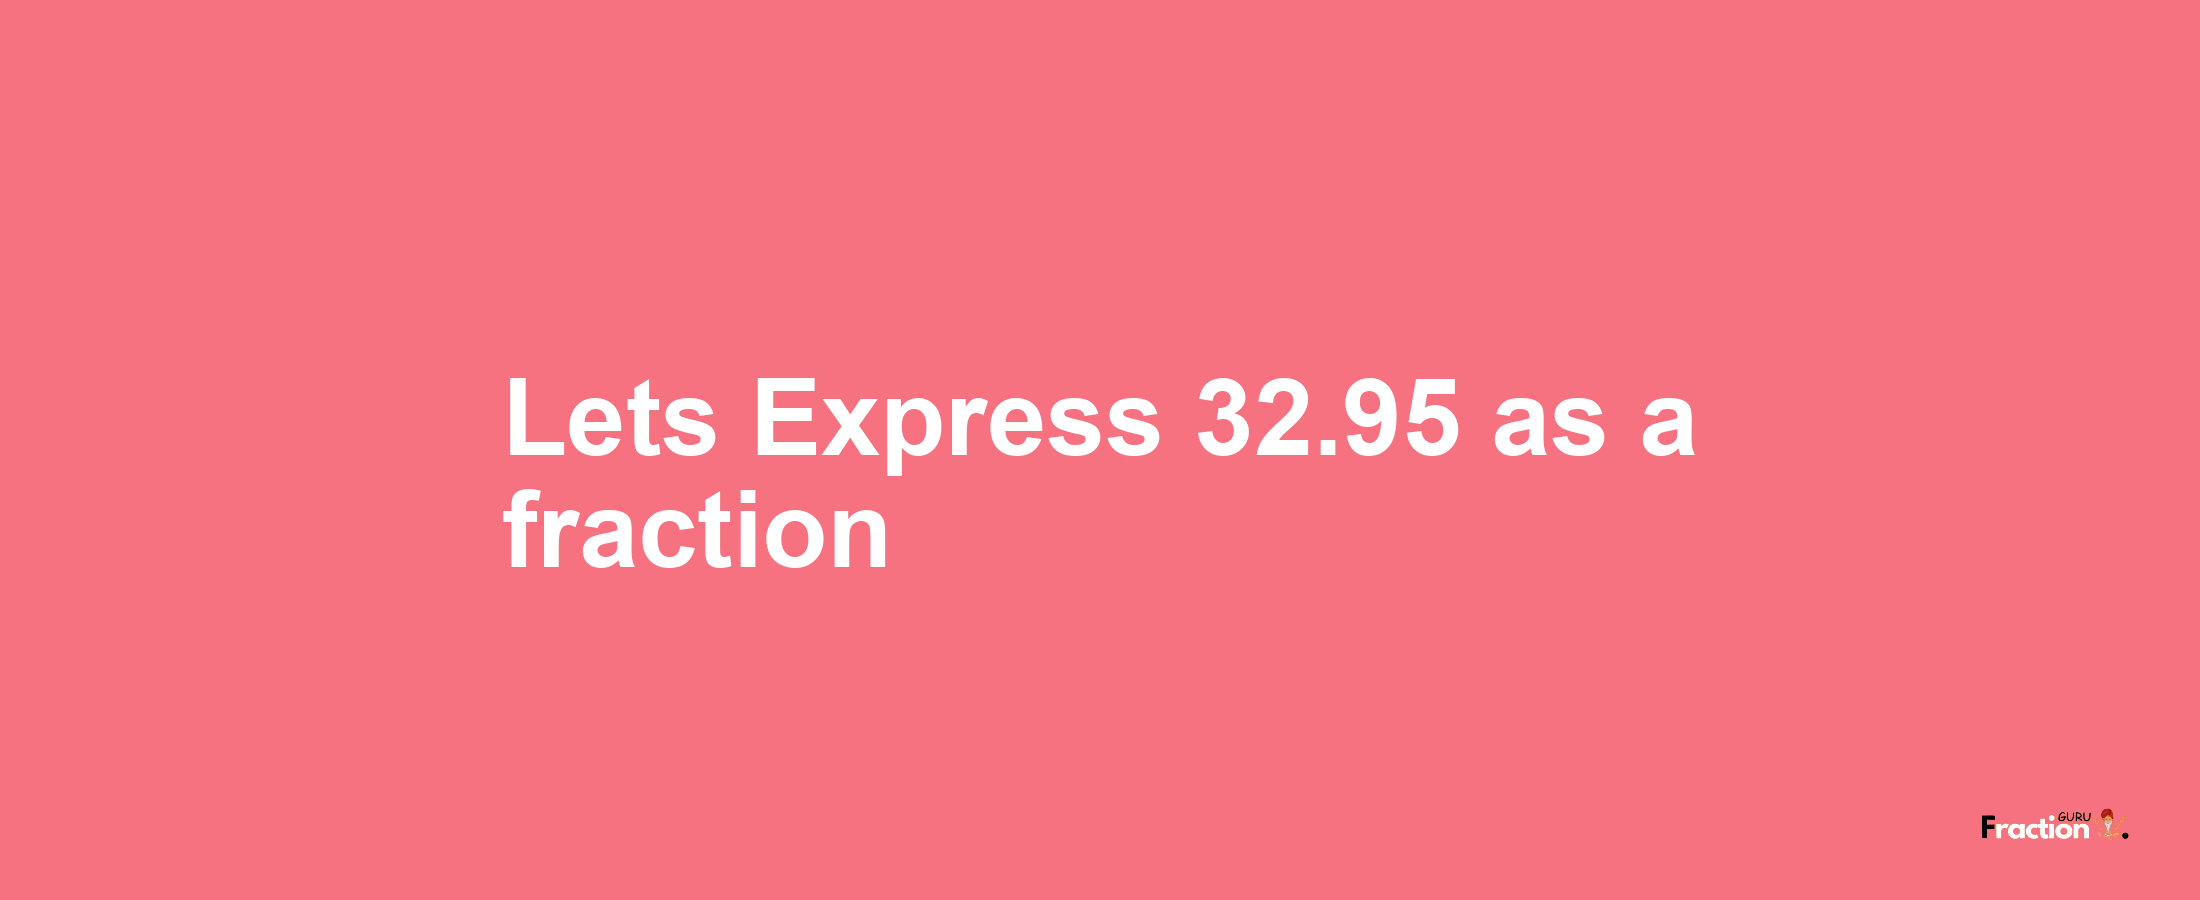 Lets Express 32.95 as afraction